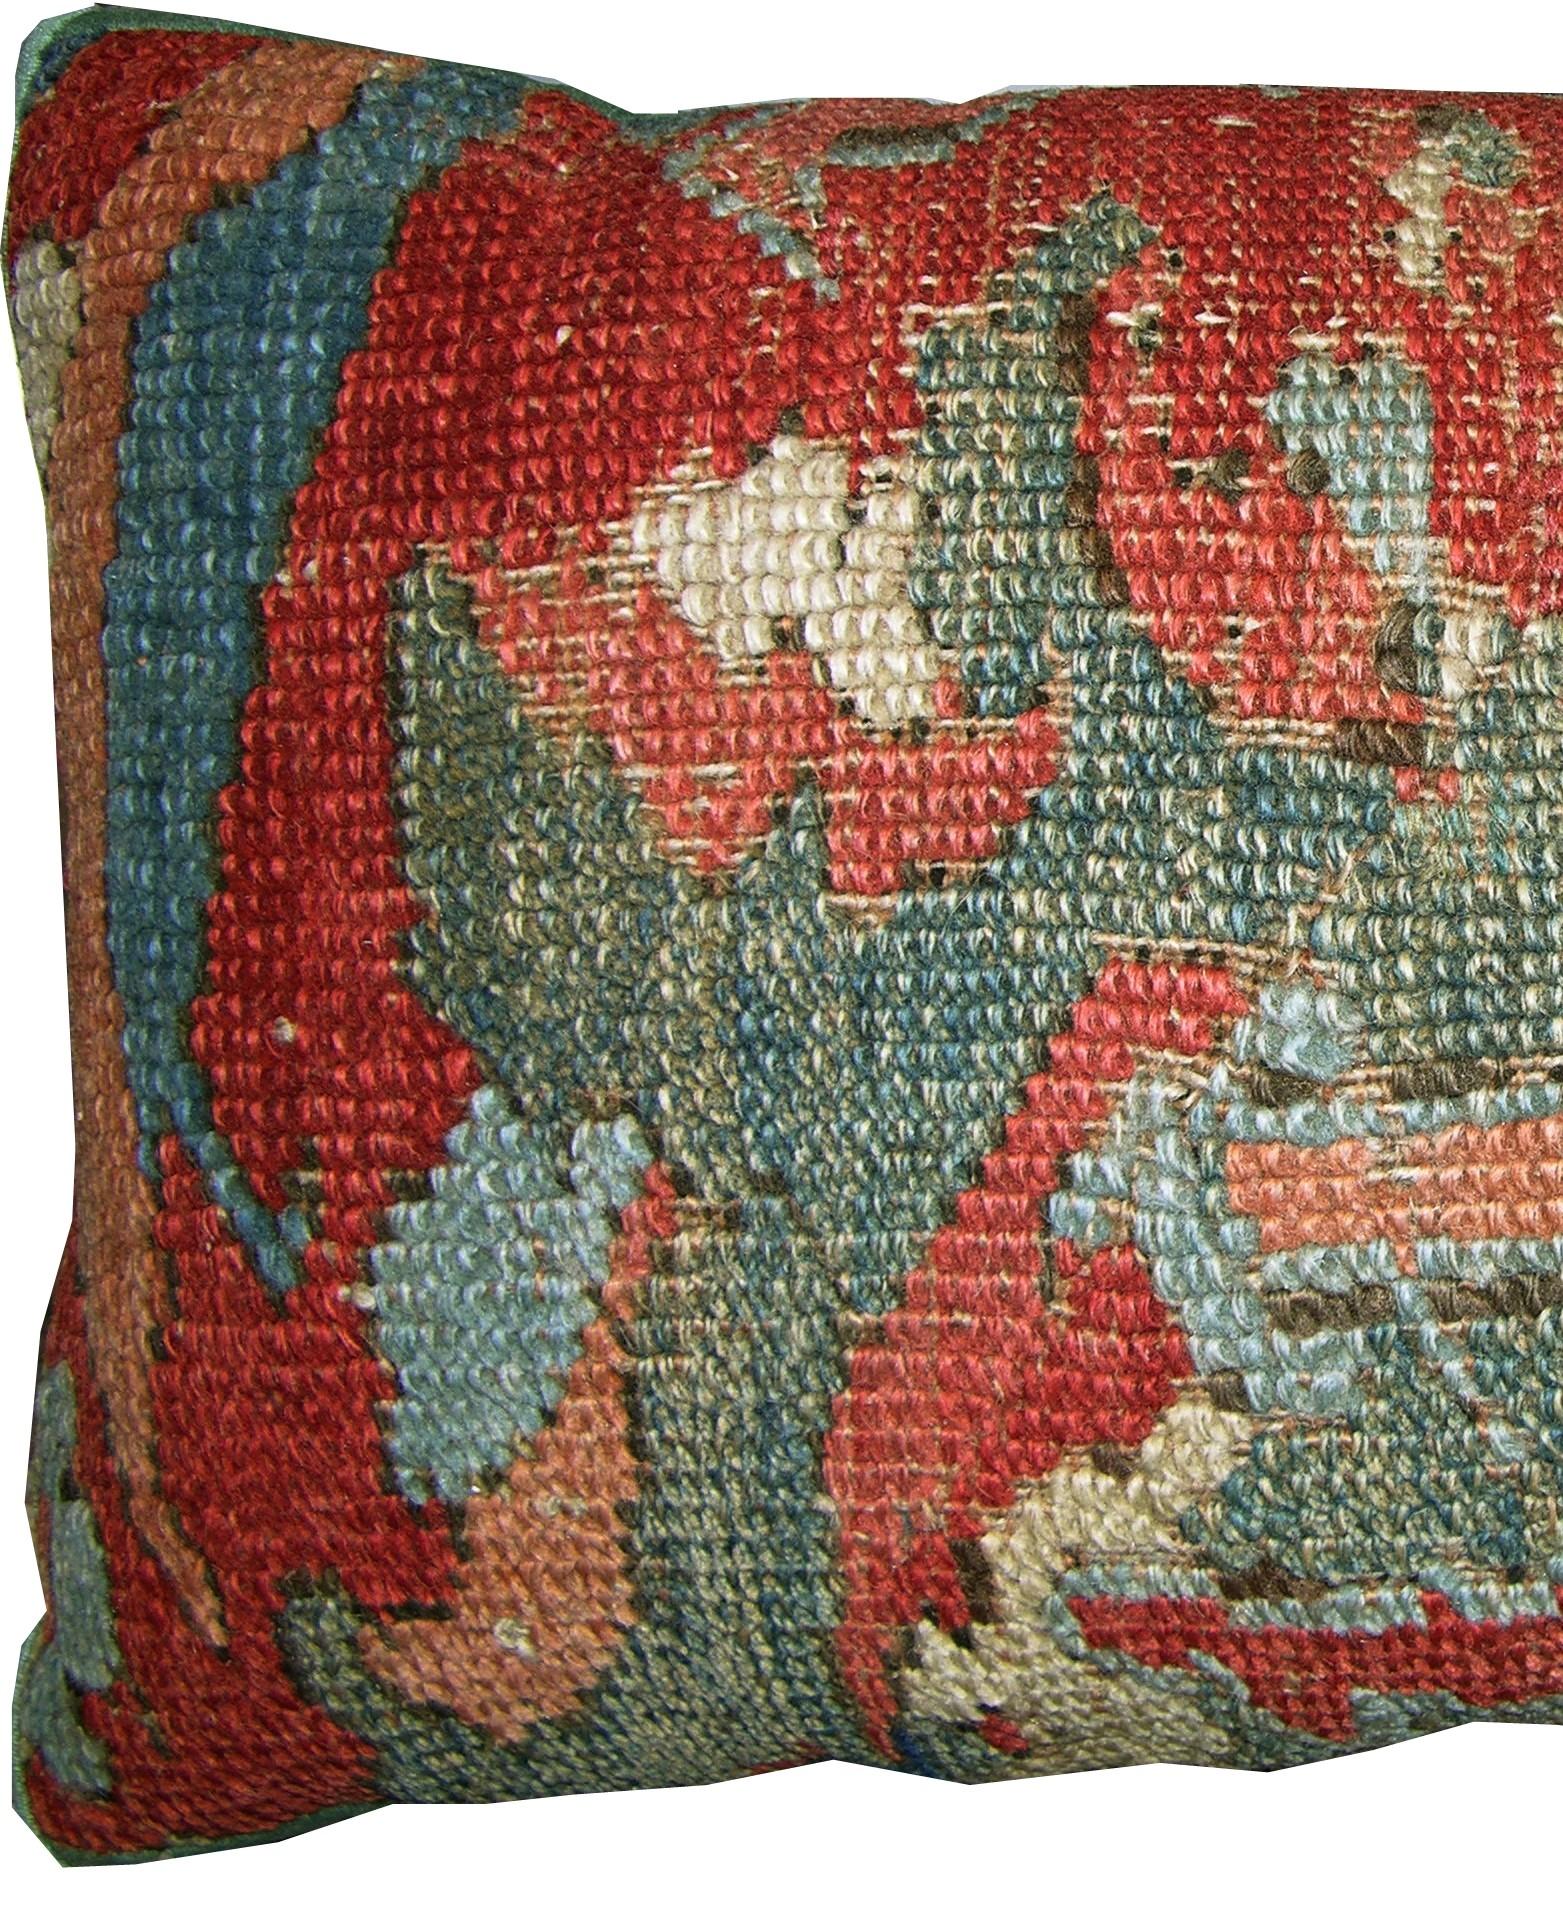 Empire 17th Century Antique Turkish Pillow For Sale